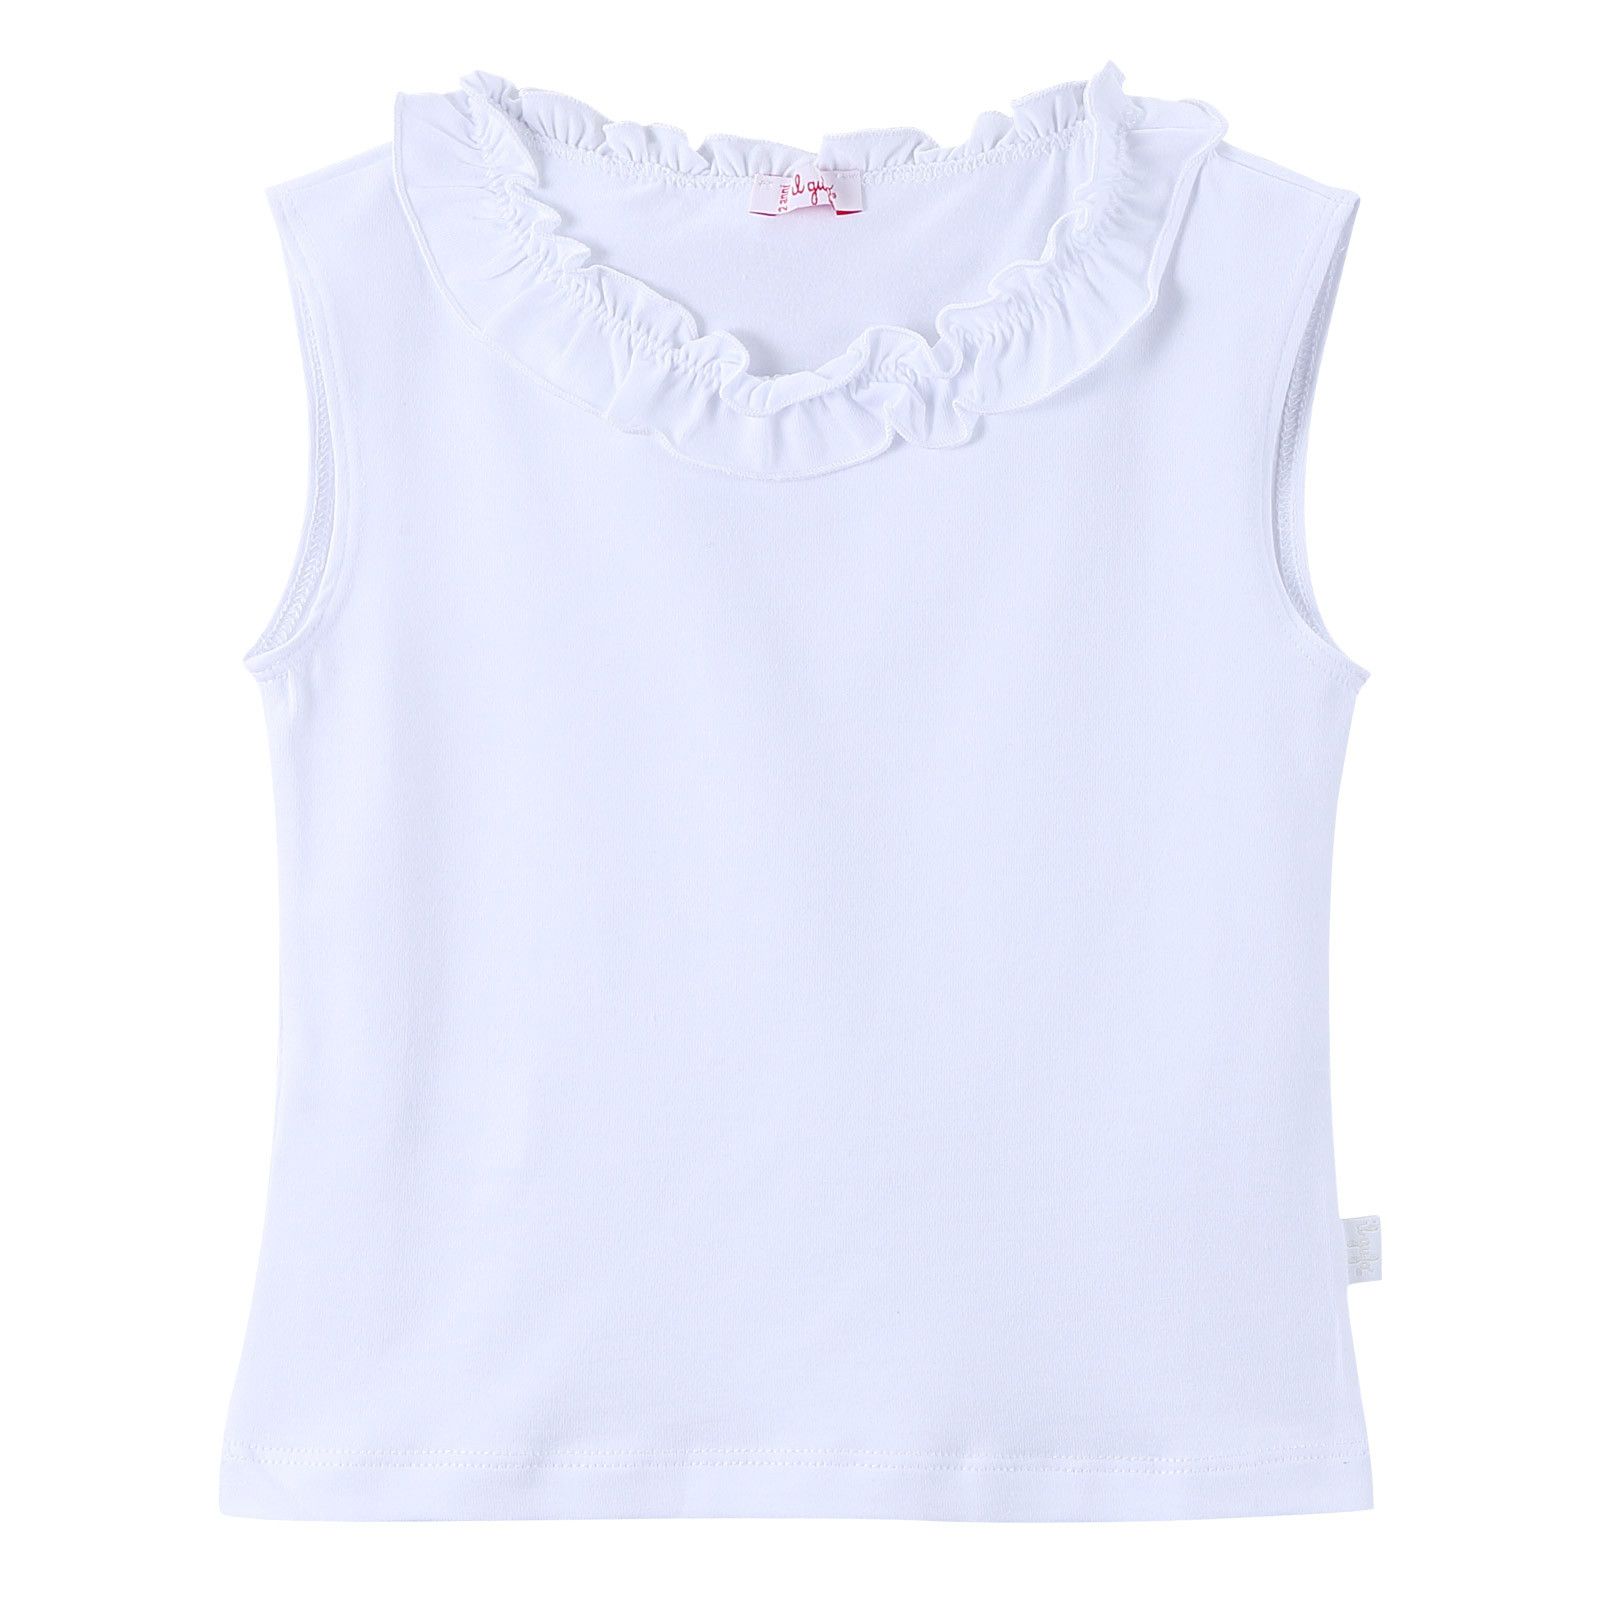 Girls White Cotton T-Shirt With Lace Collar - CÉMAROSE | Children's Fashion Store - 1